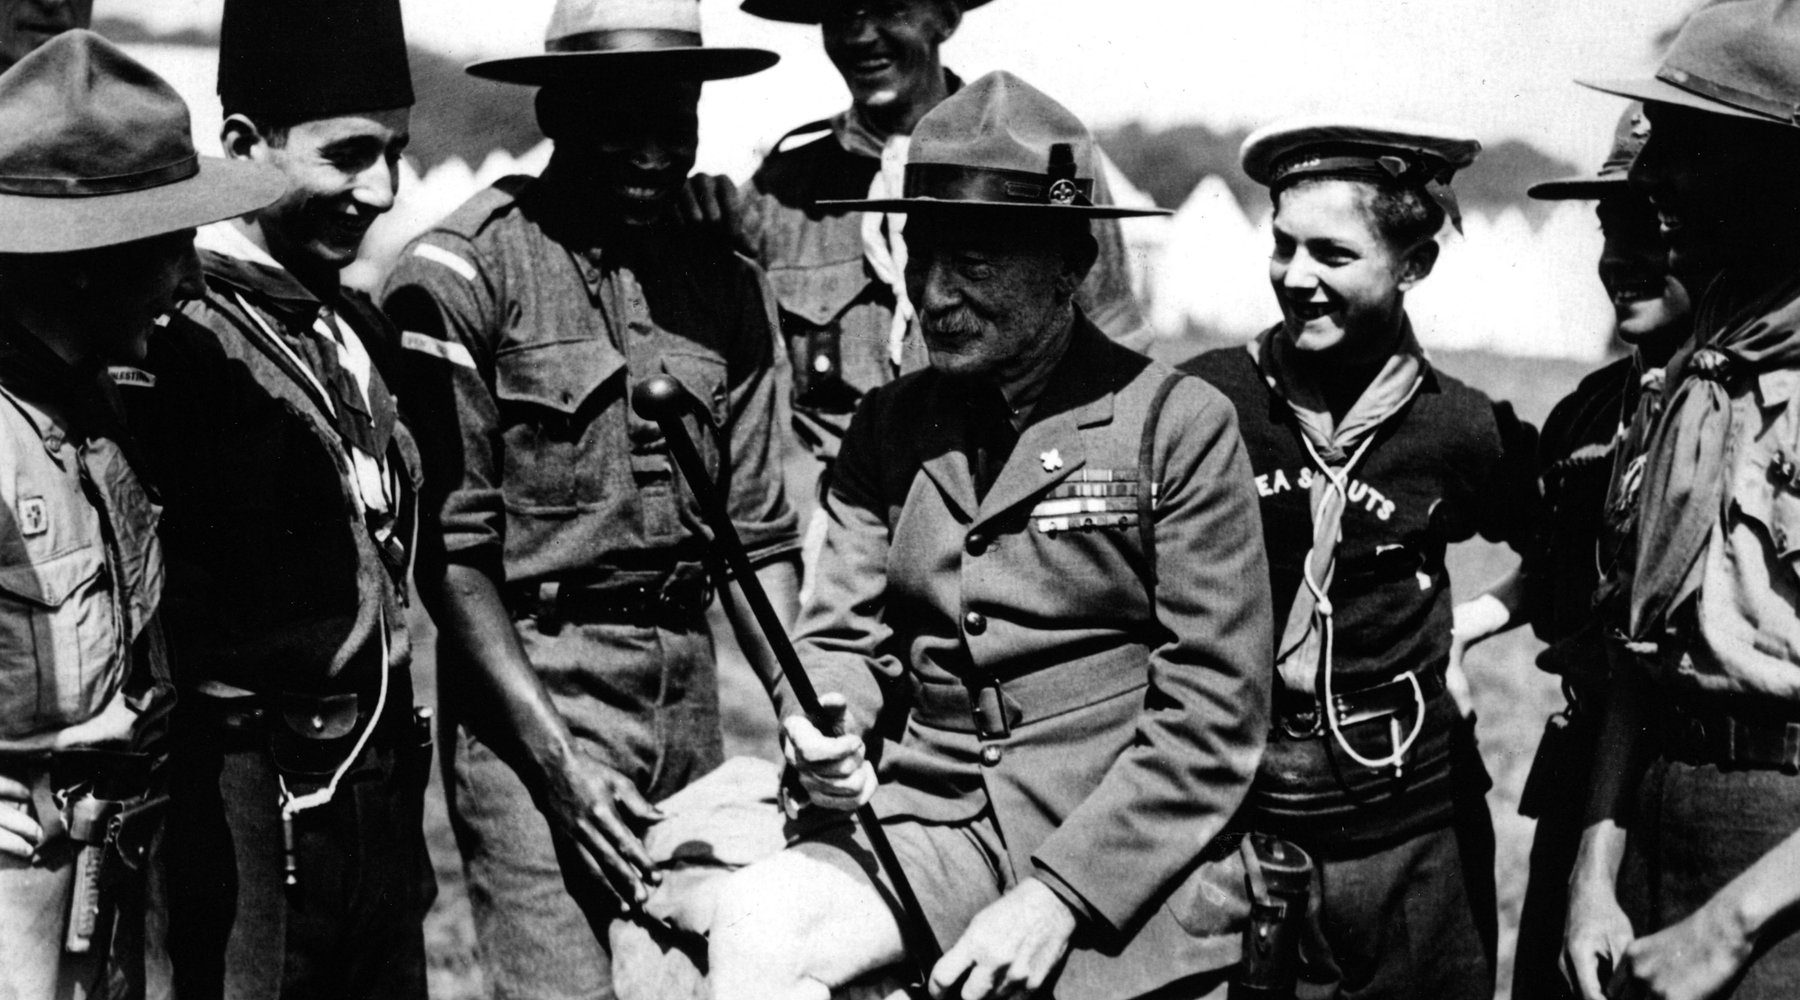 Robert Baden-Powell surrounded by Scouts